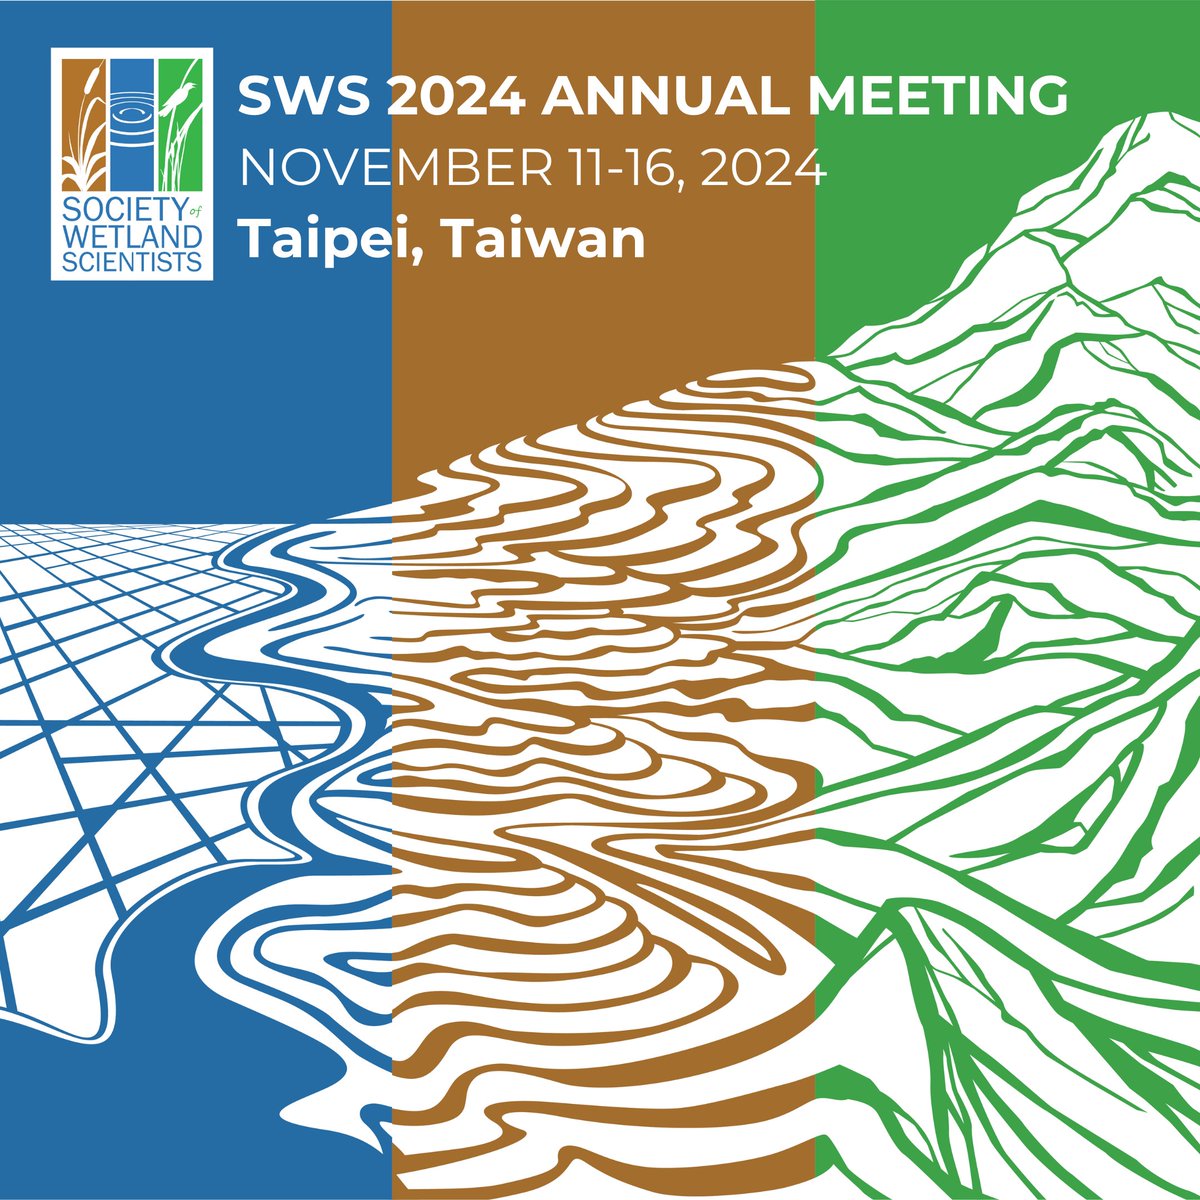 Join us for the first-ever SWS Annual Meeting in Asia! We're calling on experts from all realms - academics, consultants, government officials - to share your insights by submitting your abstracts before May 15th! Submit abstracts today: bit.ly/3xFsGIb